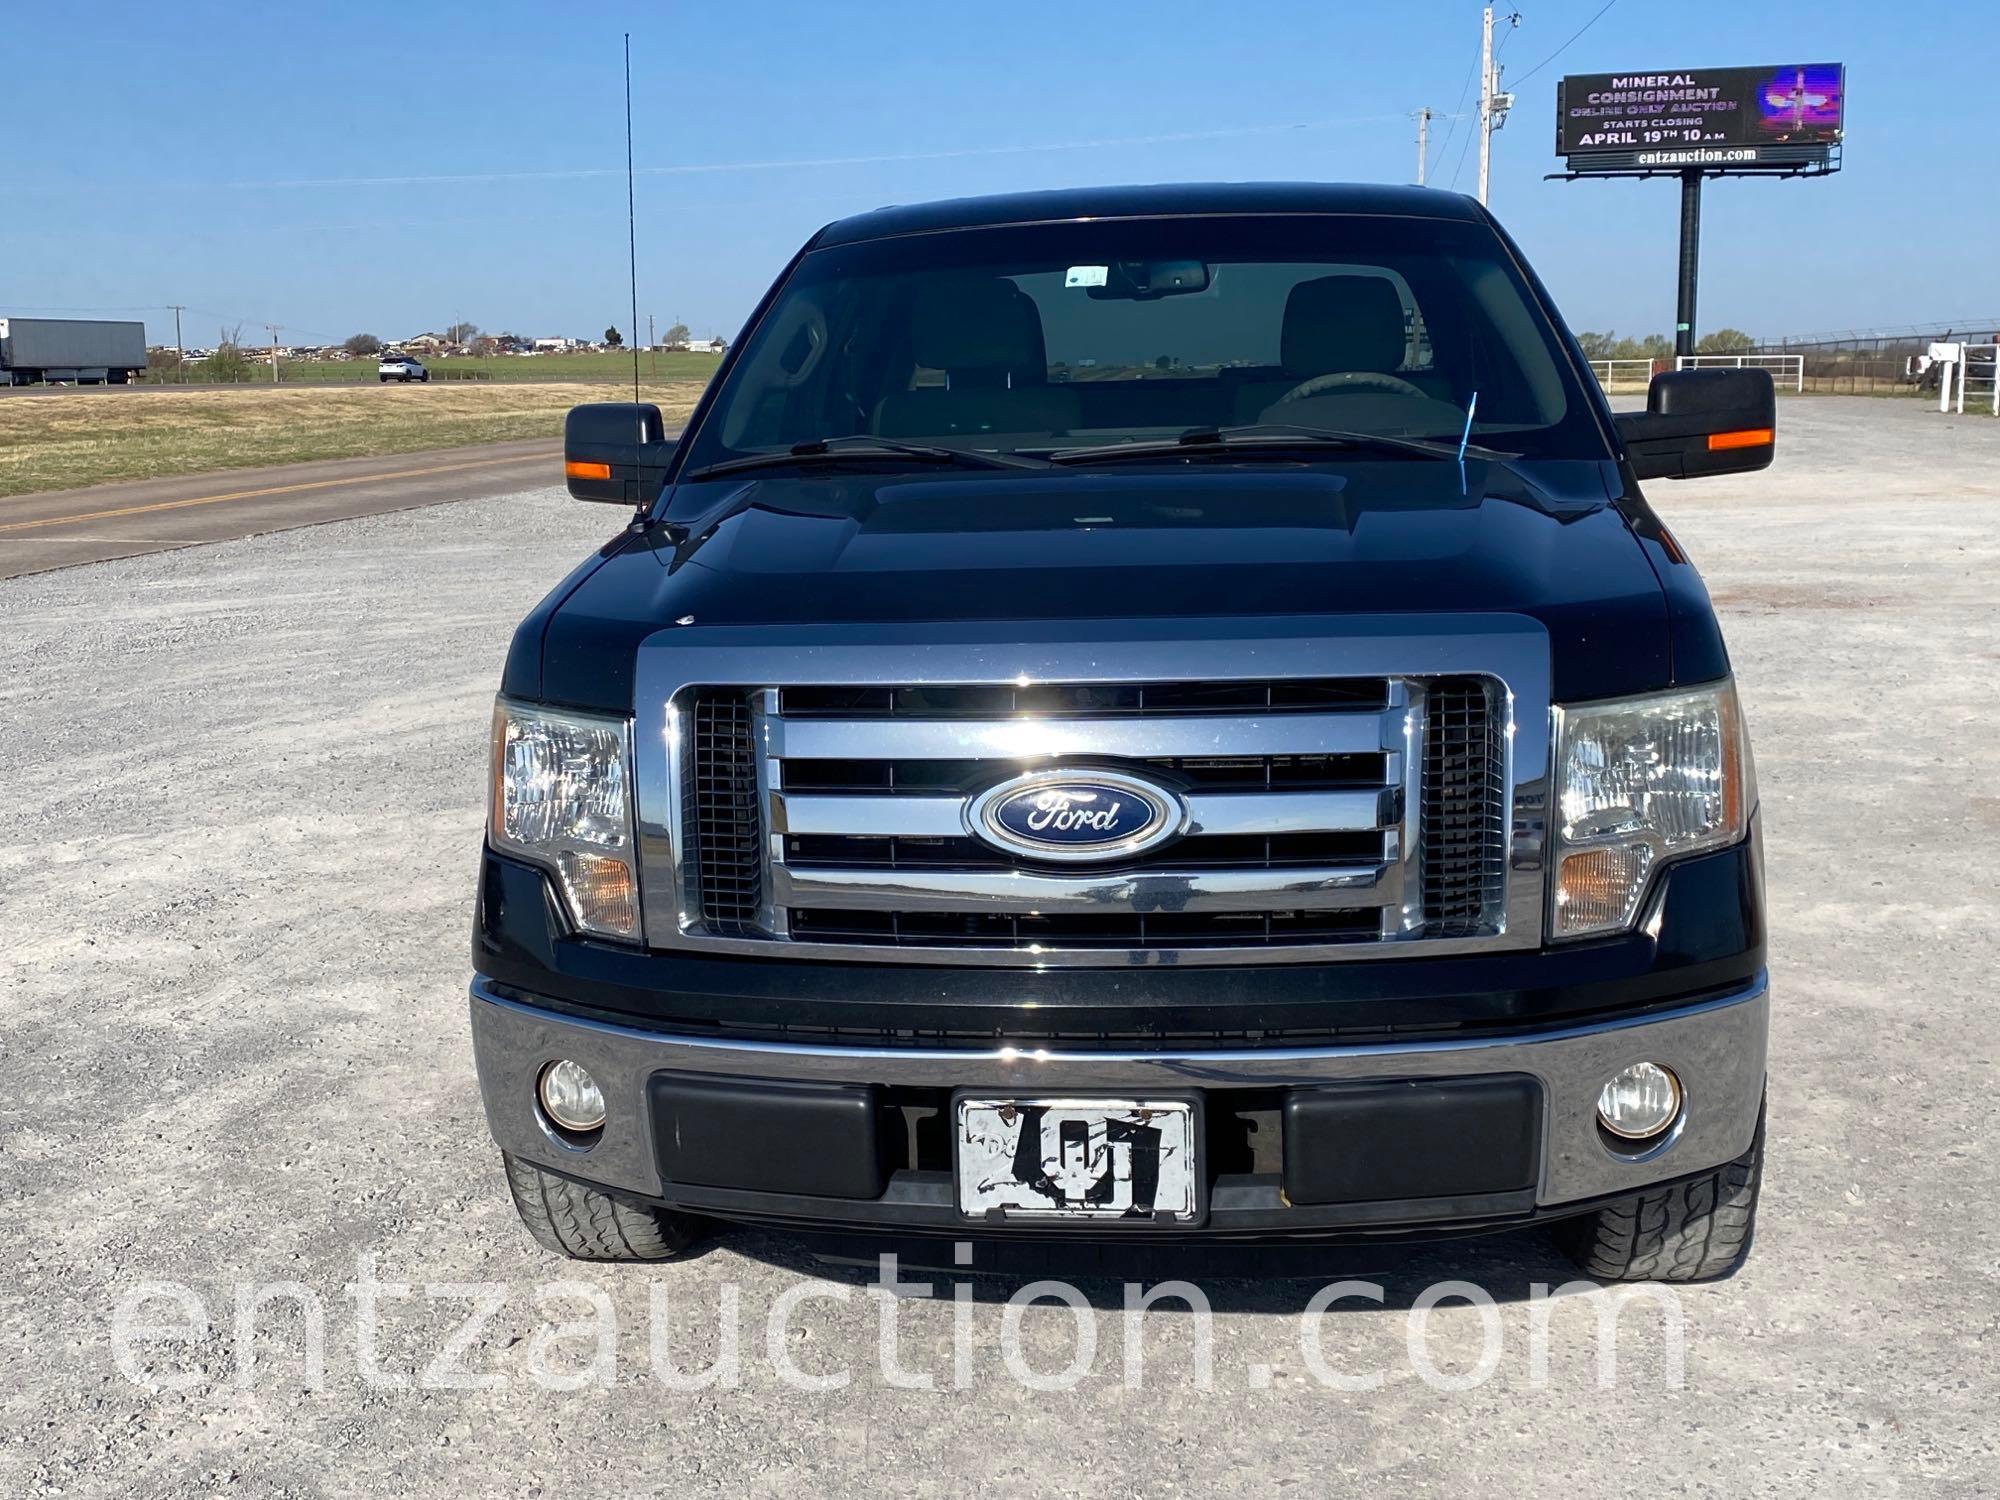 2010 FORD F150 XLT PICKUP, EXT. CAB,